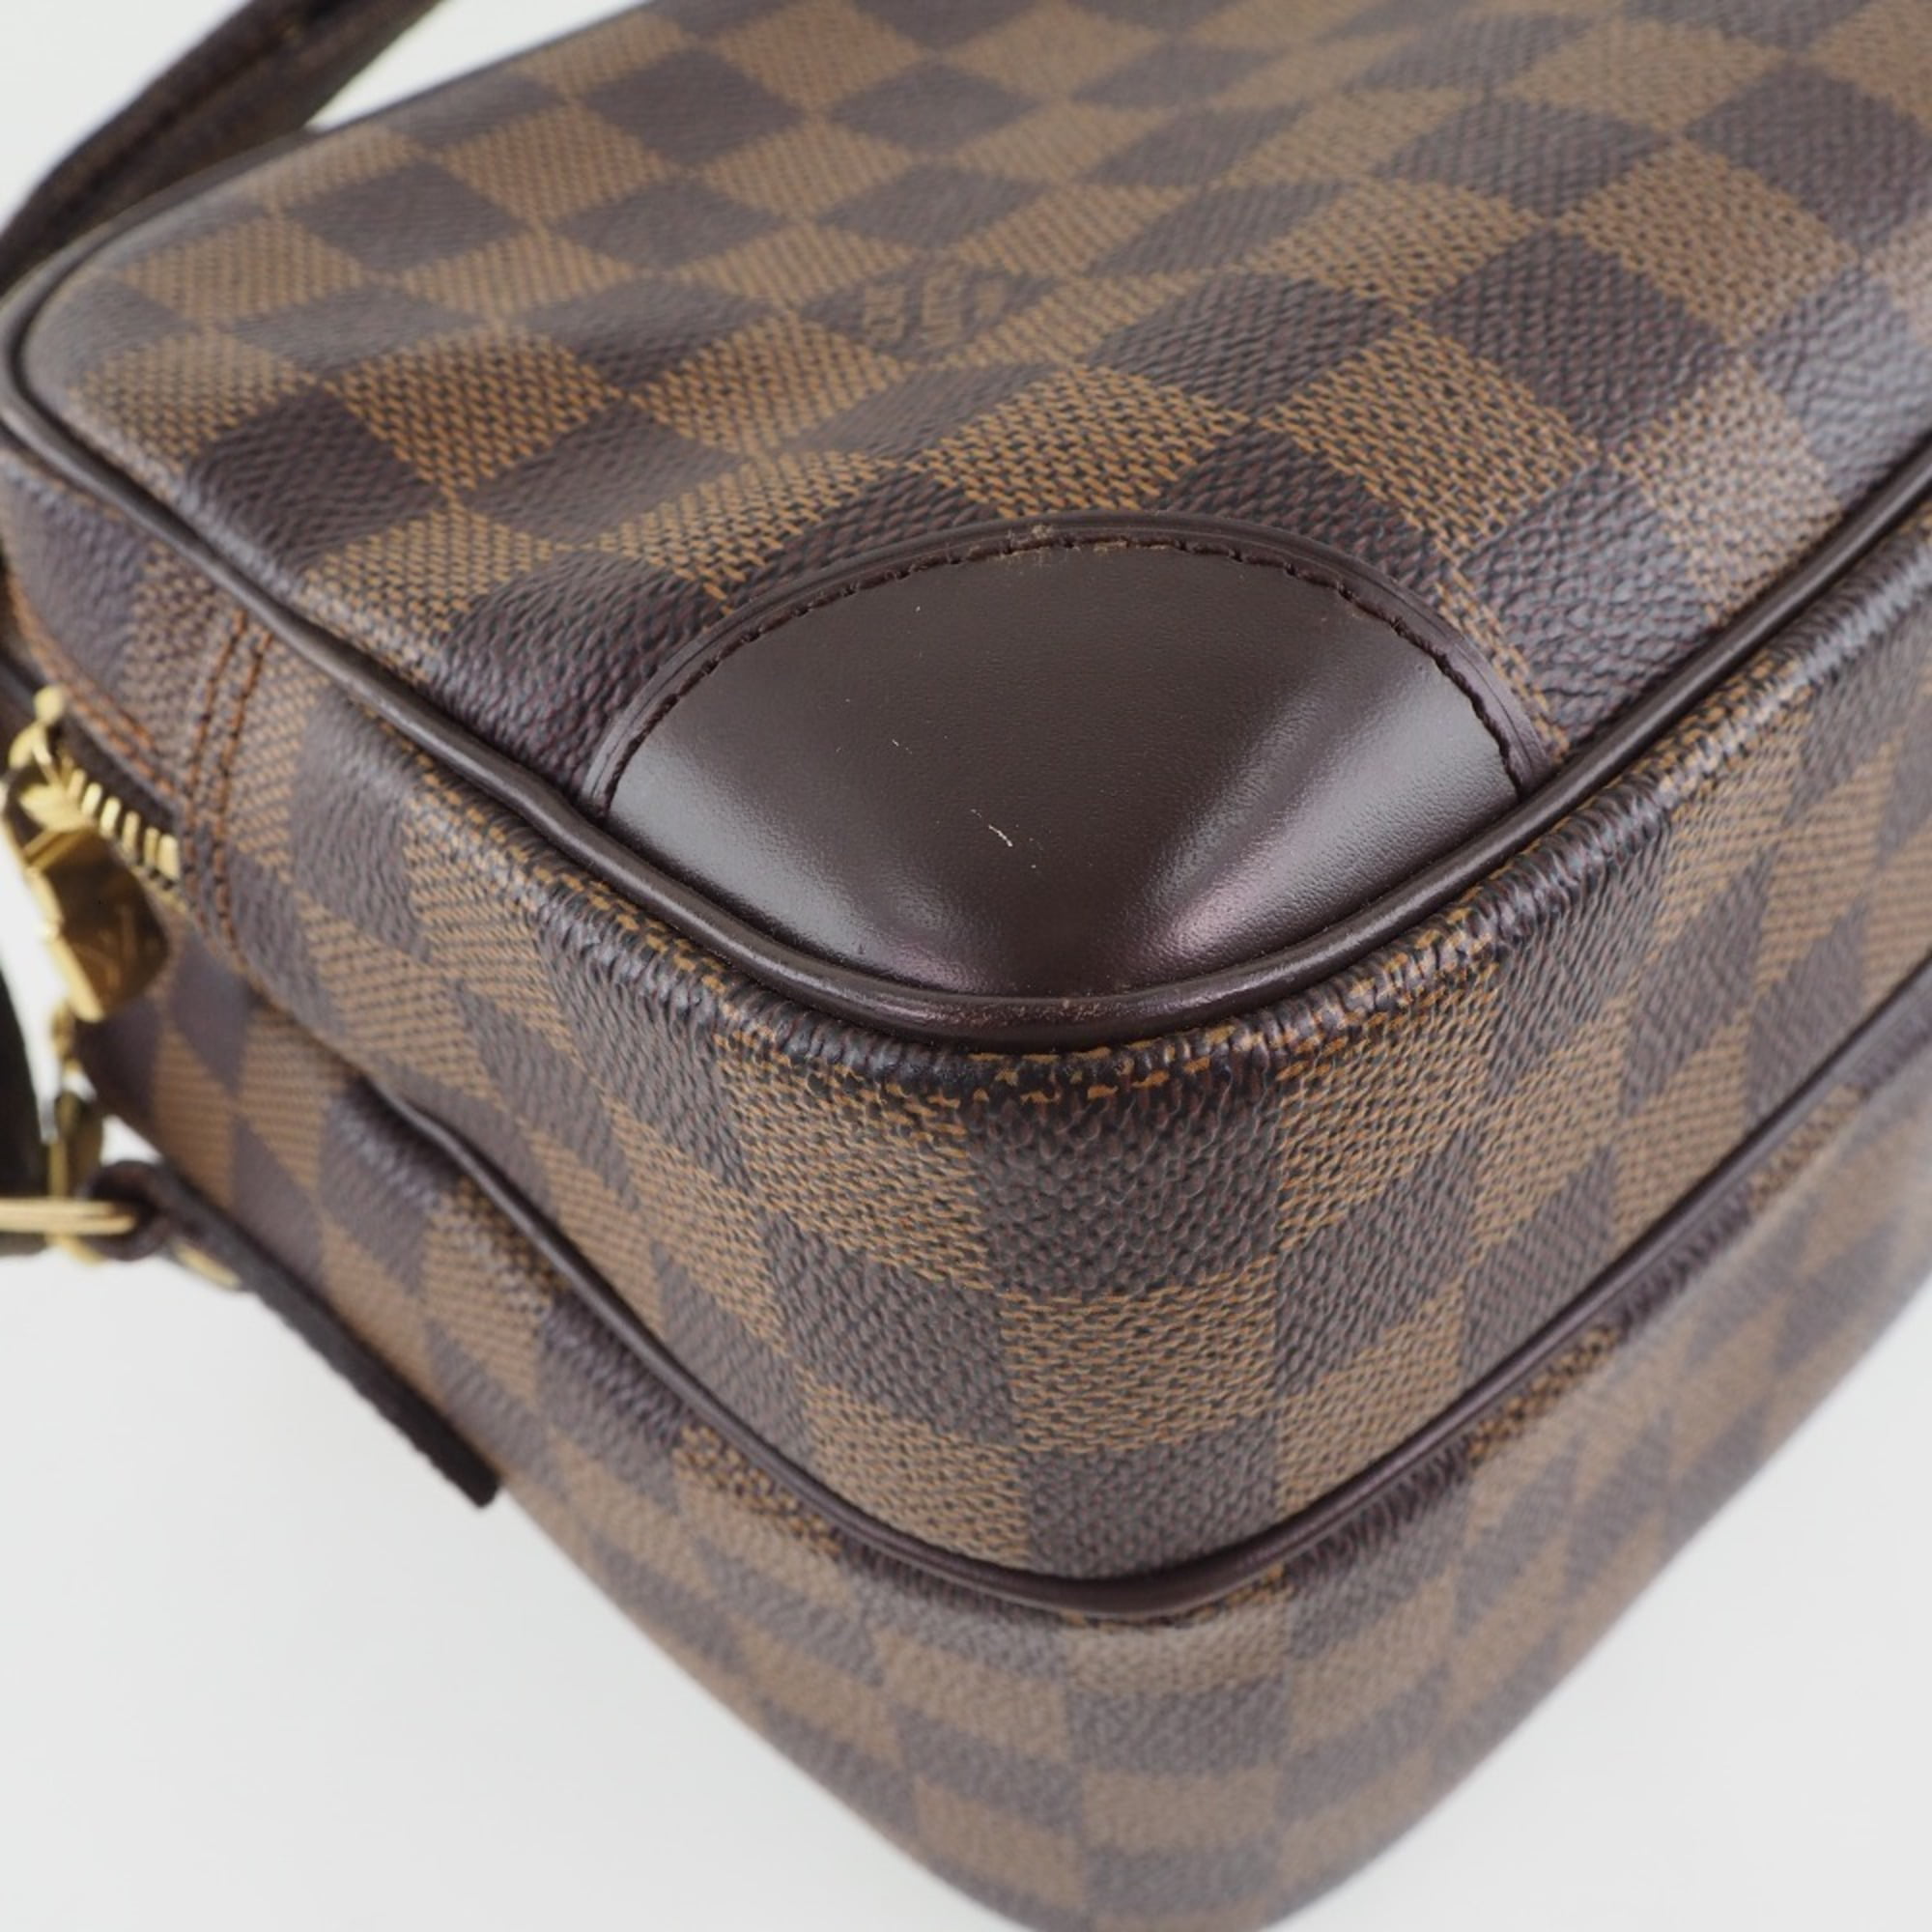 Louis Vuitton - Authenticated Nile Handbag - Leather Brown for Women, Very Good Condition